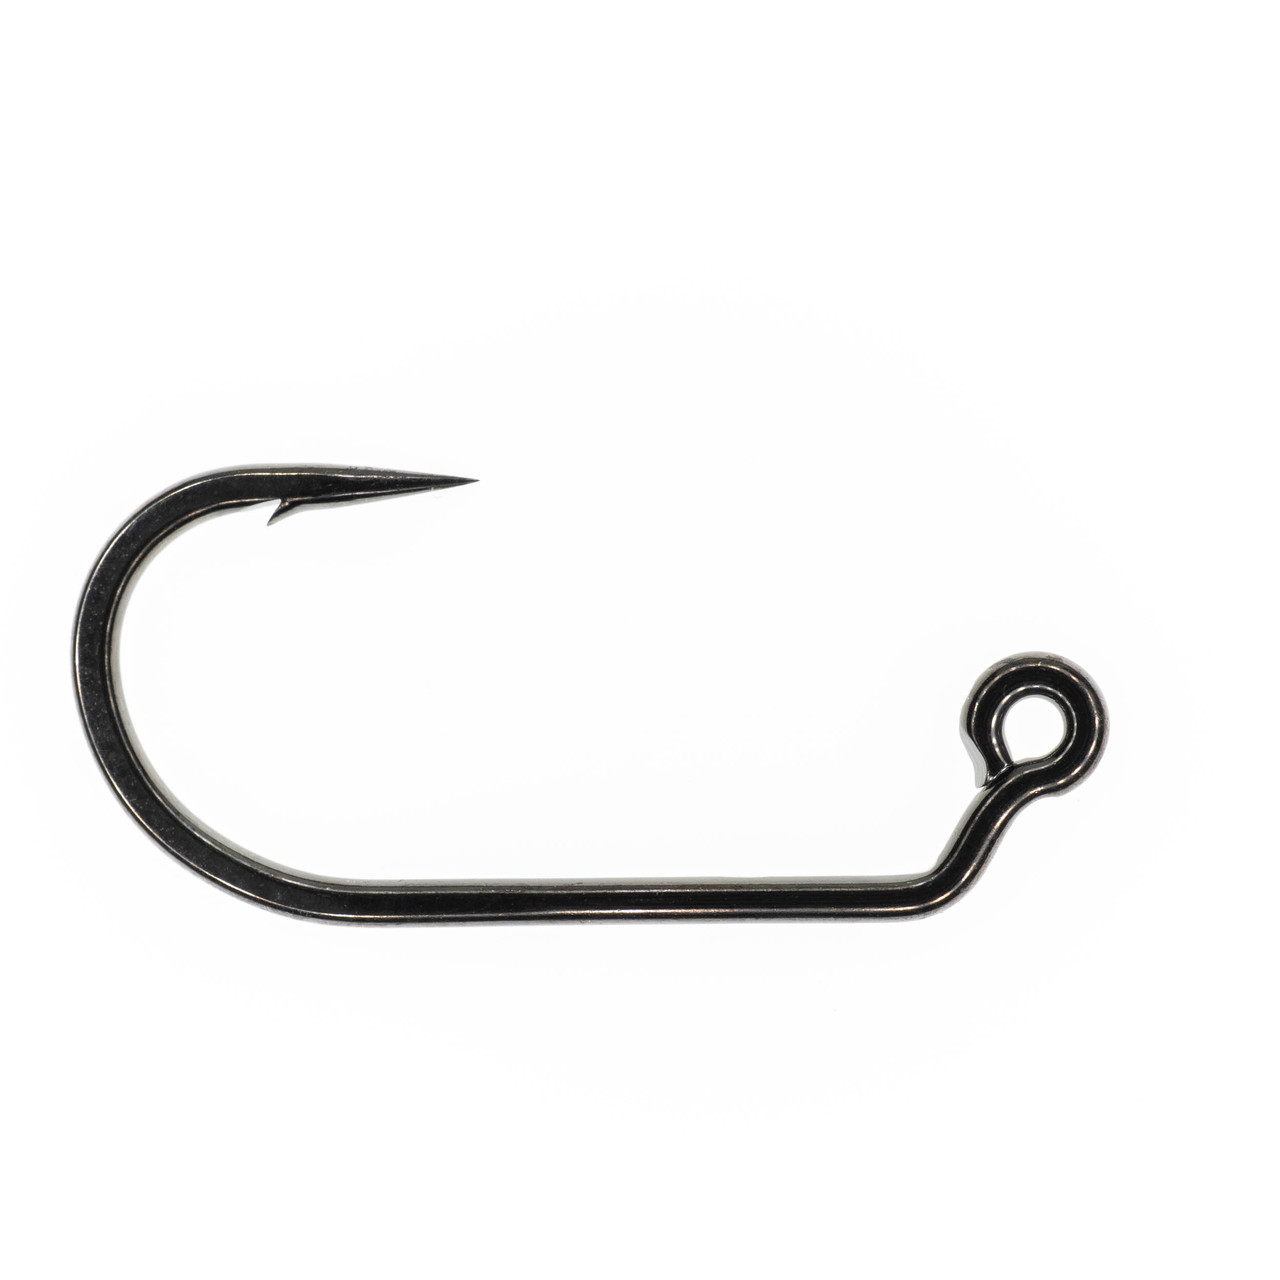 NOS 100 Barbless Mustad 3257 B Size 14 Fly Hook Fishing Kink Instead of Barb